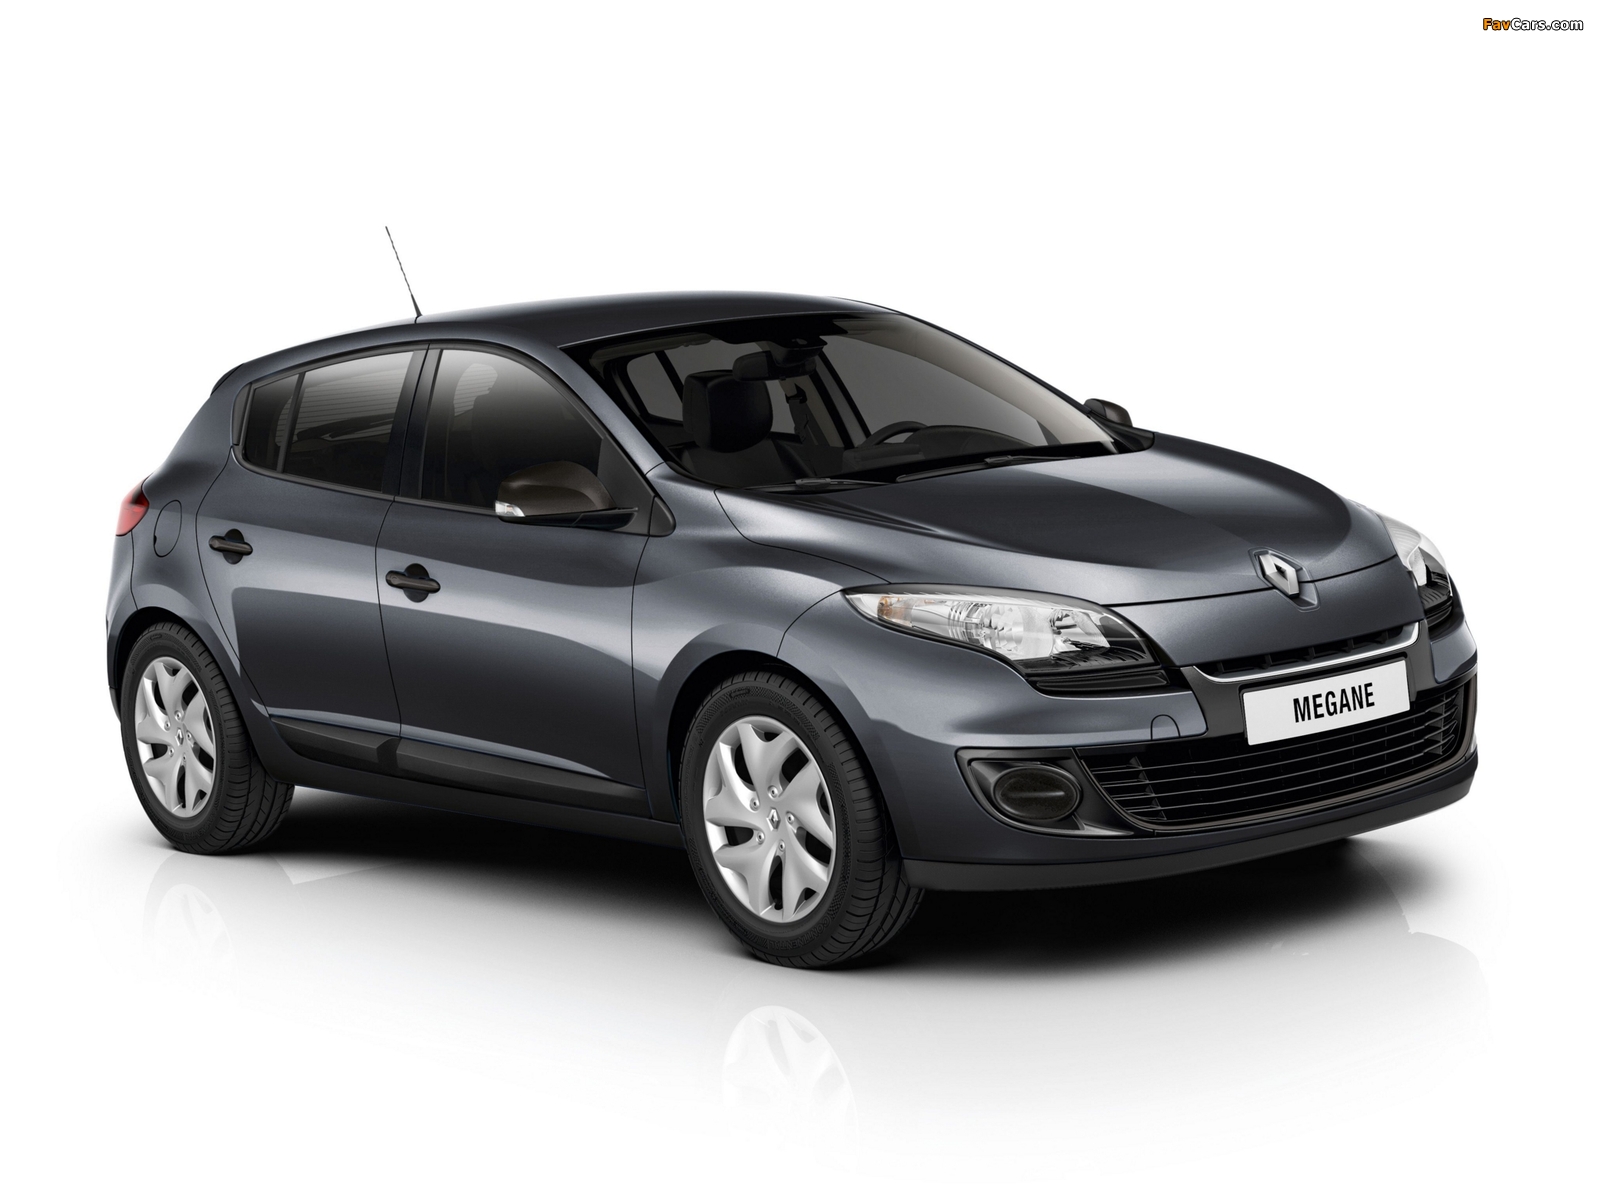 Pictures of Renault Mégane Je taime 2012 (1600 x 1200)